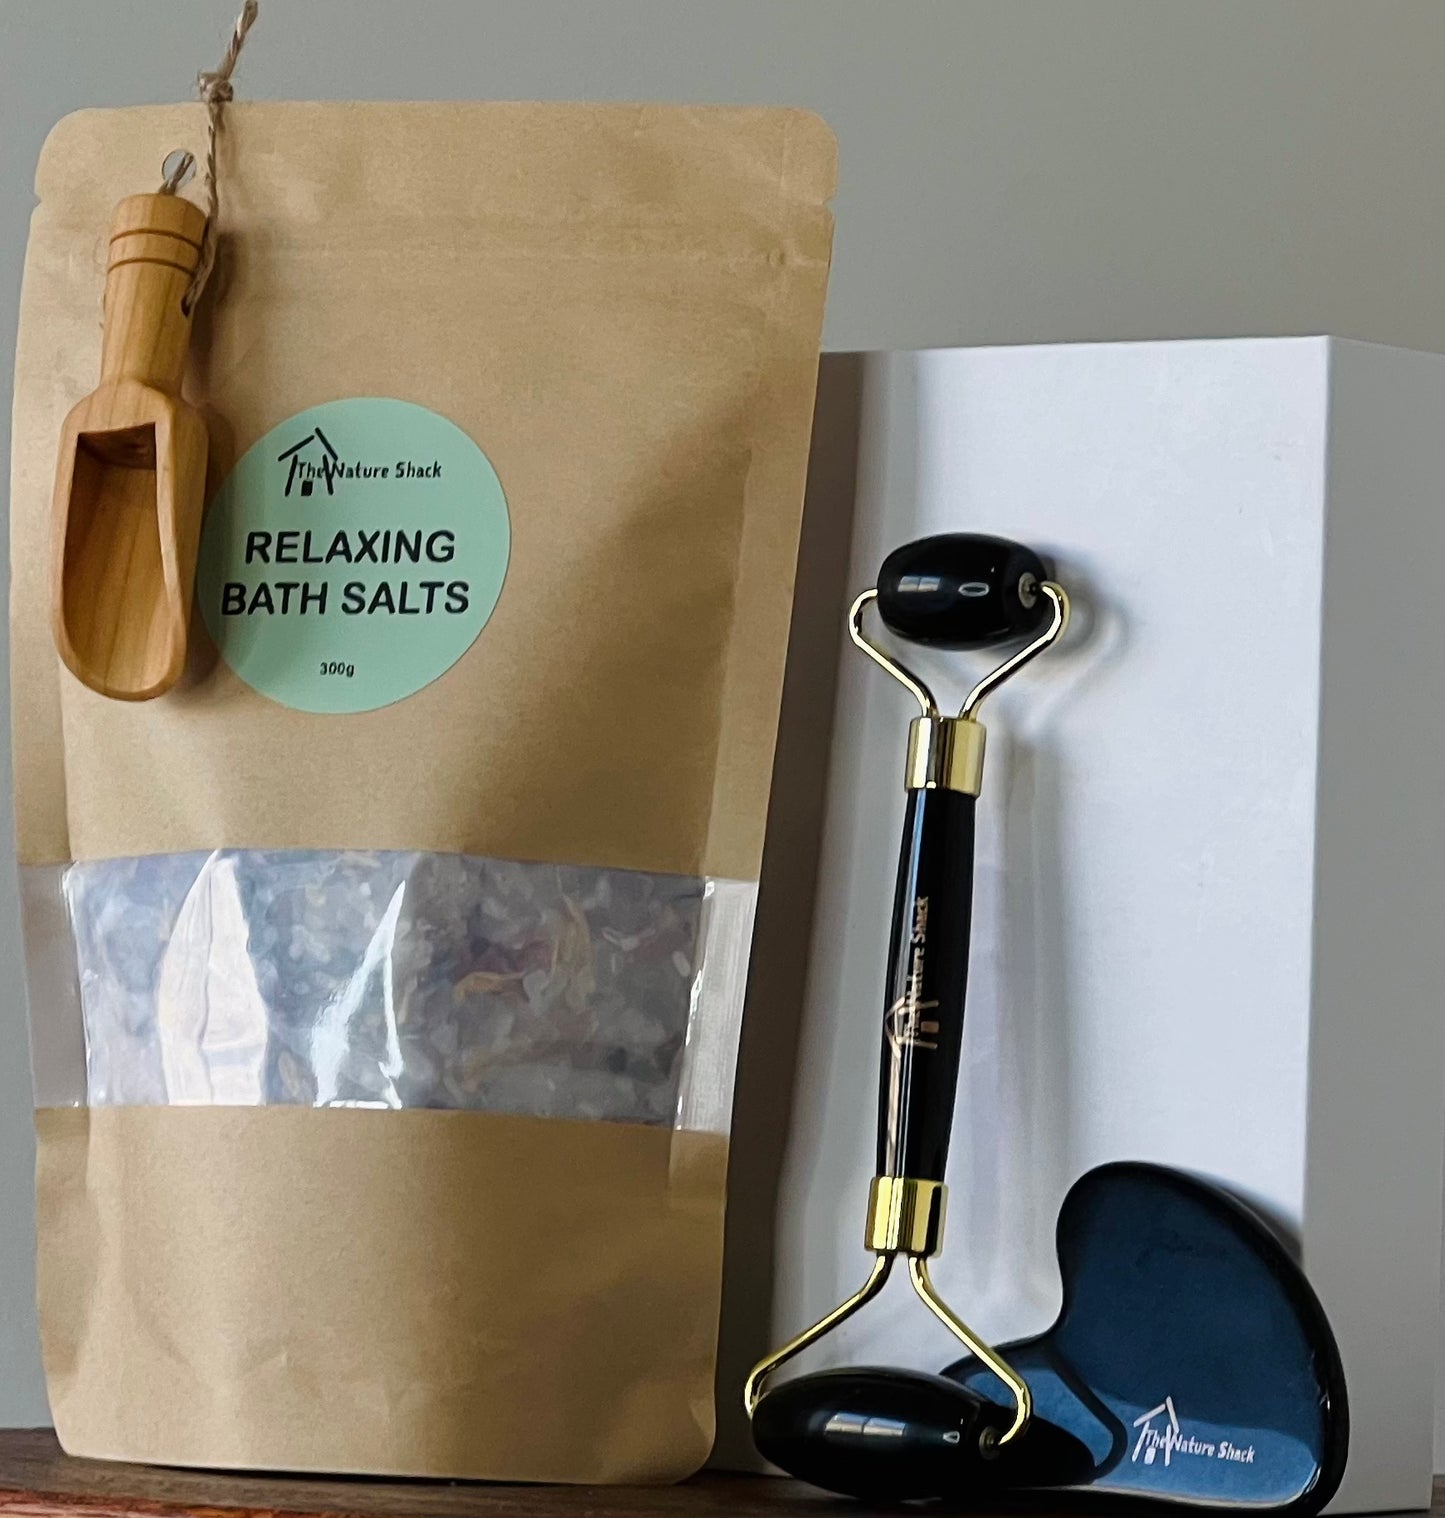 Mother's Day Bundle - Relaxing Bath Salts and Facial Massage Roller